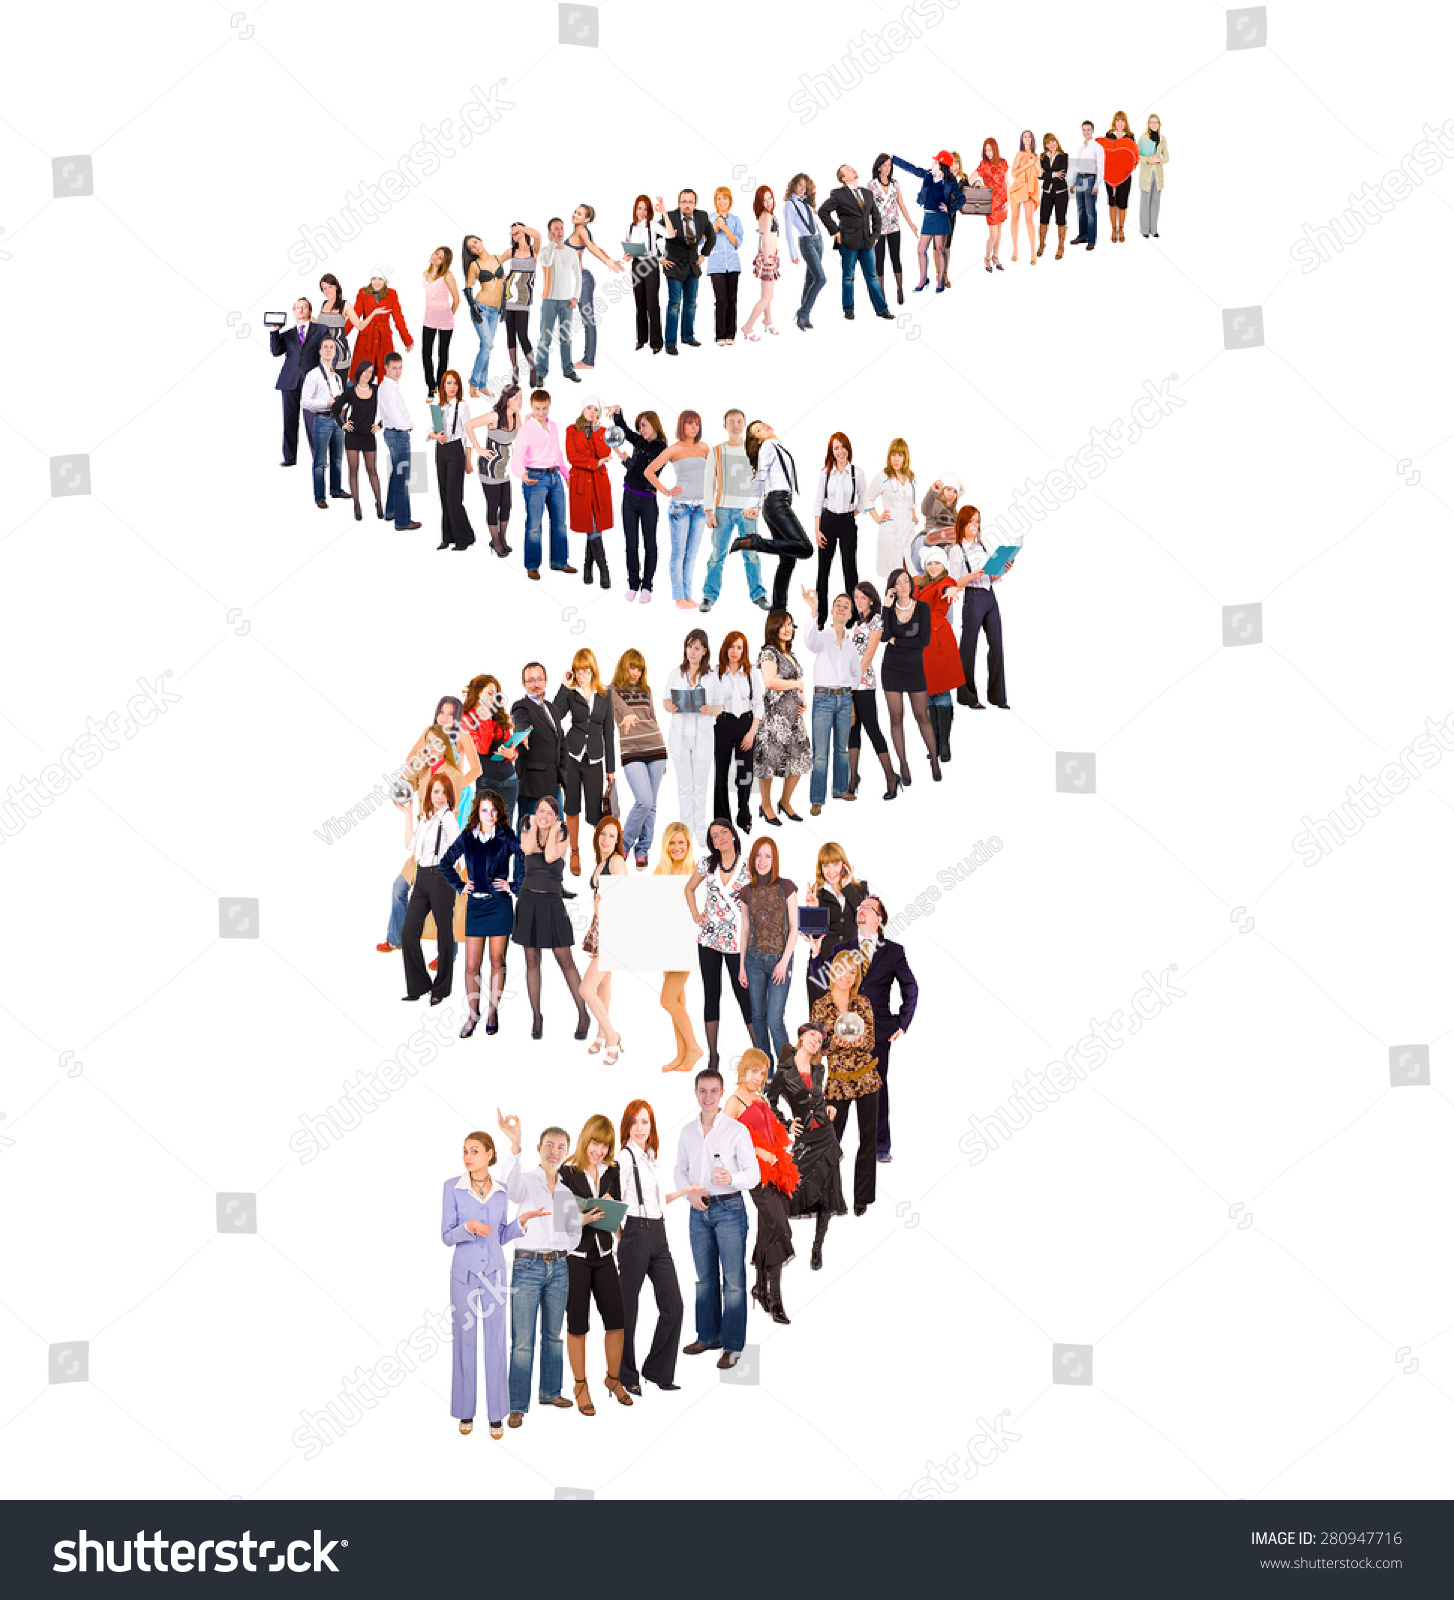 People Queue Very Long Line Stock Photo (Download Now) 280947716 ...